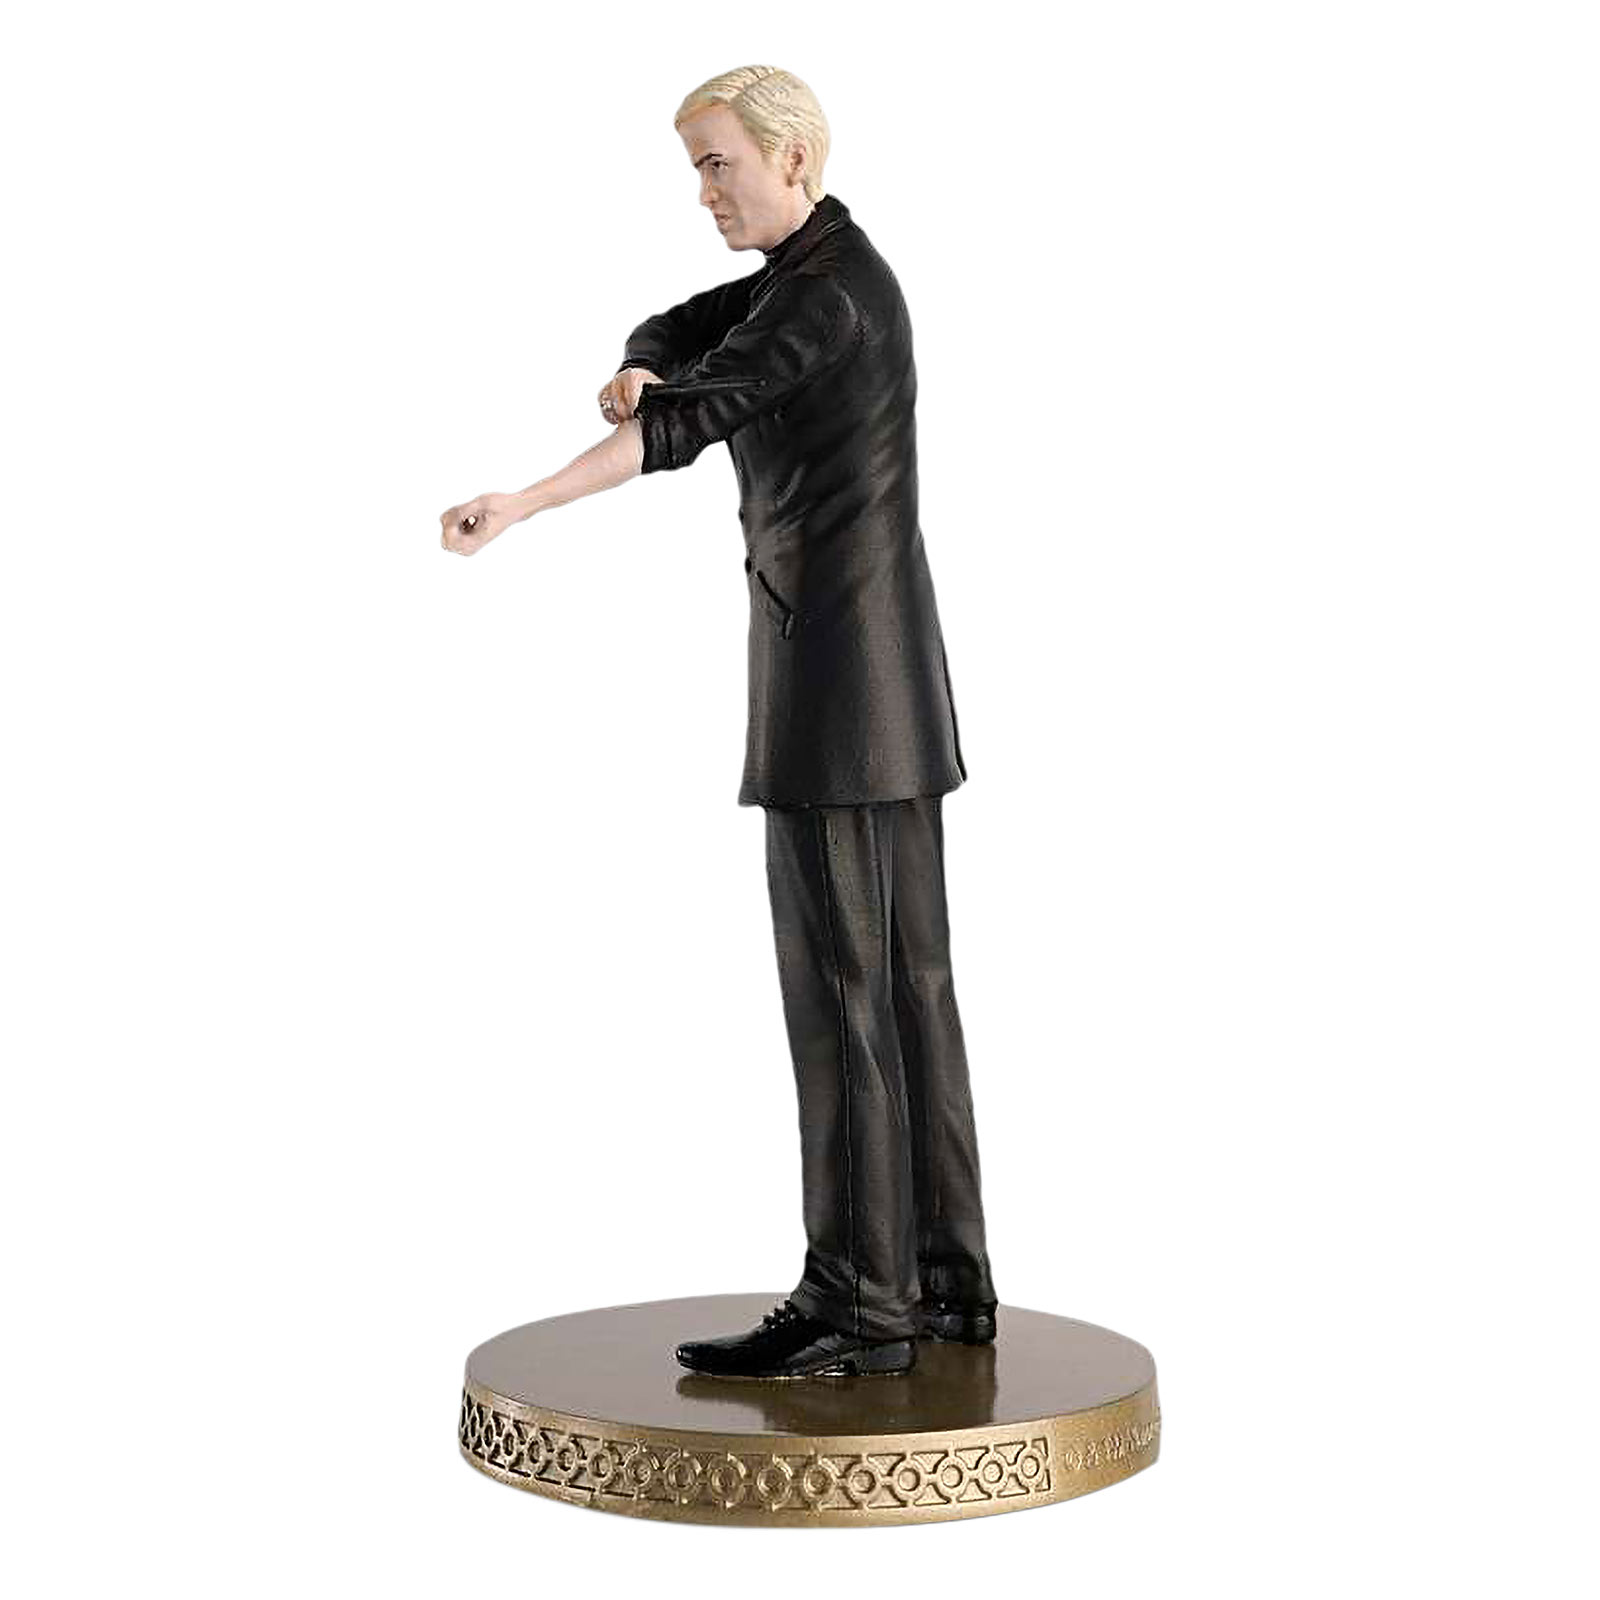 Draco Malfoy Death Eater Hero Collector Figure 11 cm - Harry Potter